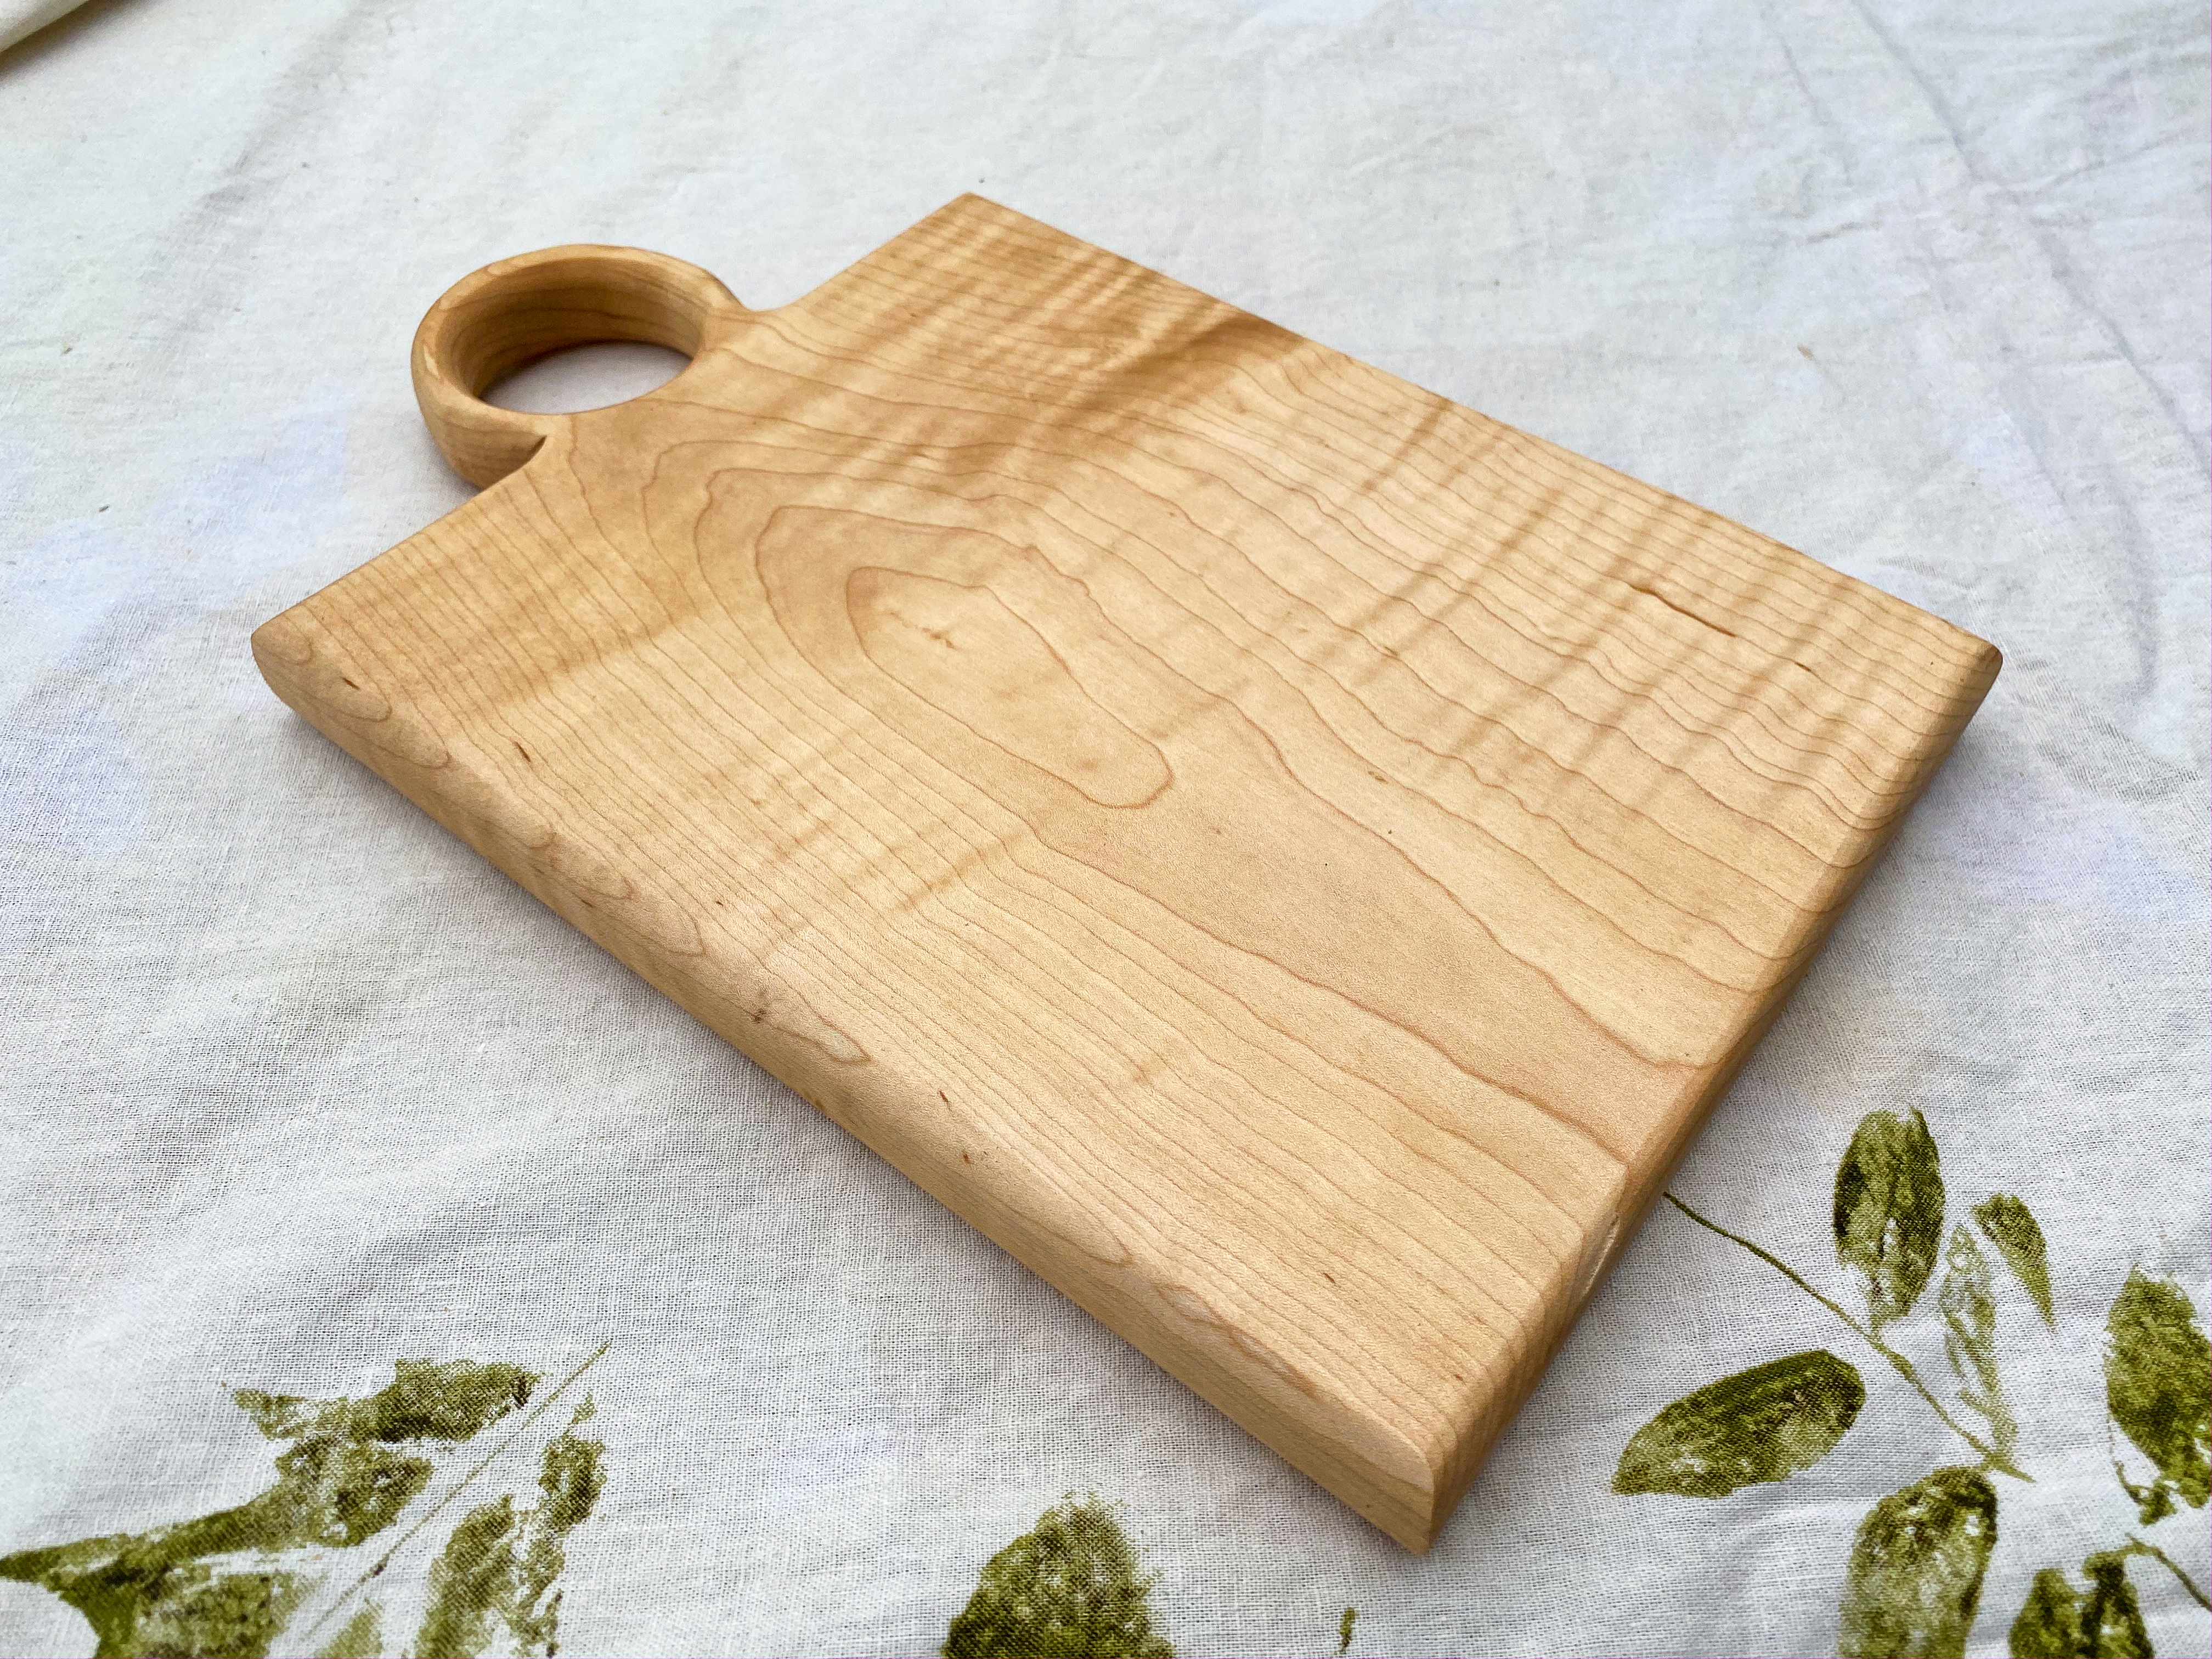 Handmade 13" x 8" curley maple wooden square cheese board.